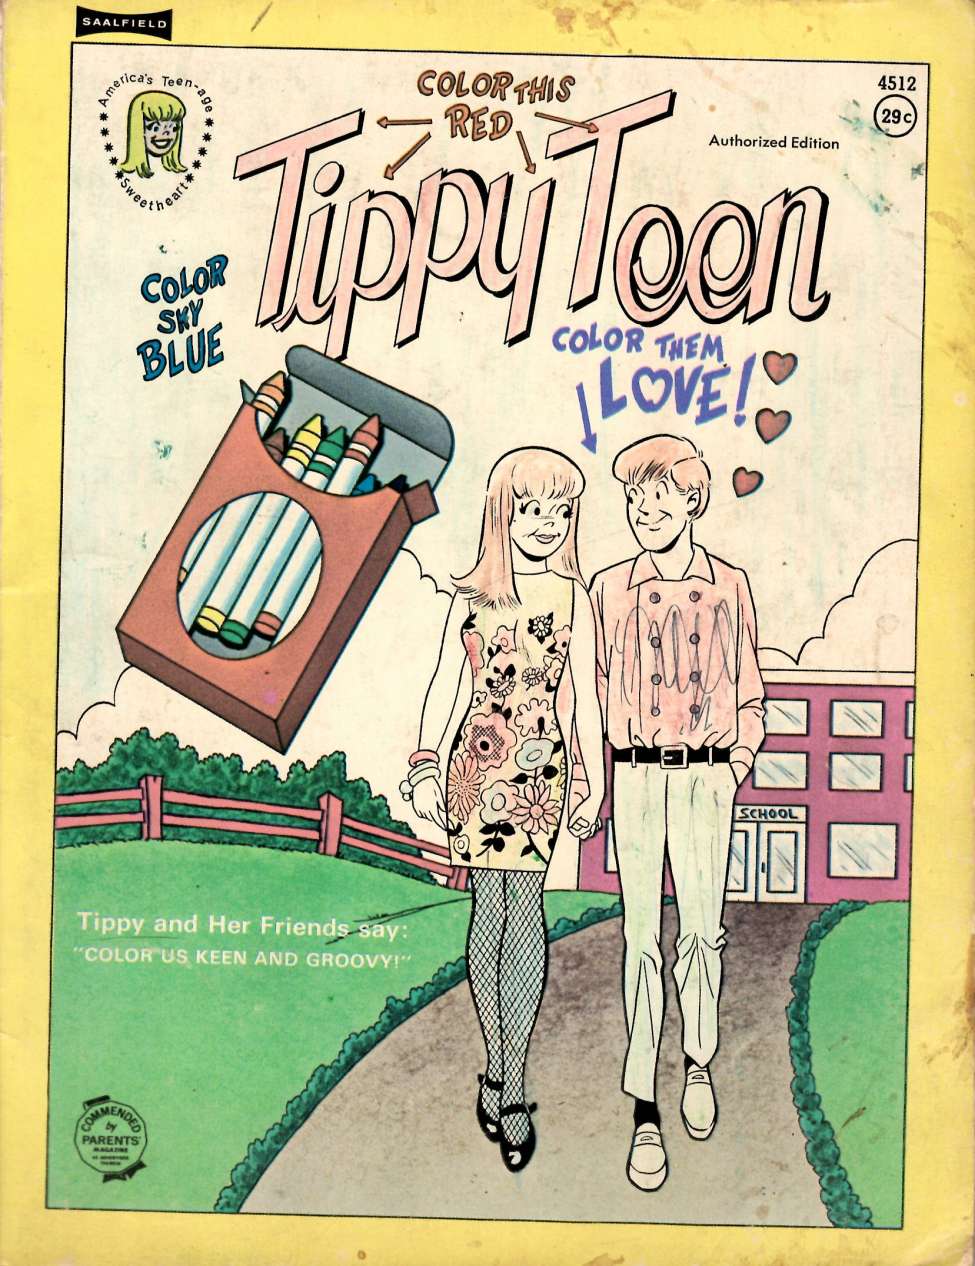 Book Cover For Tippy Teen Coloring Book 4512